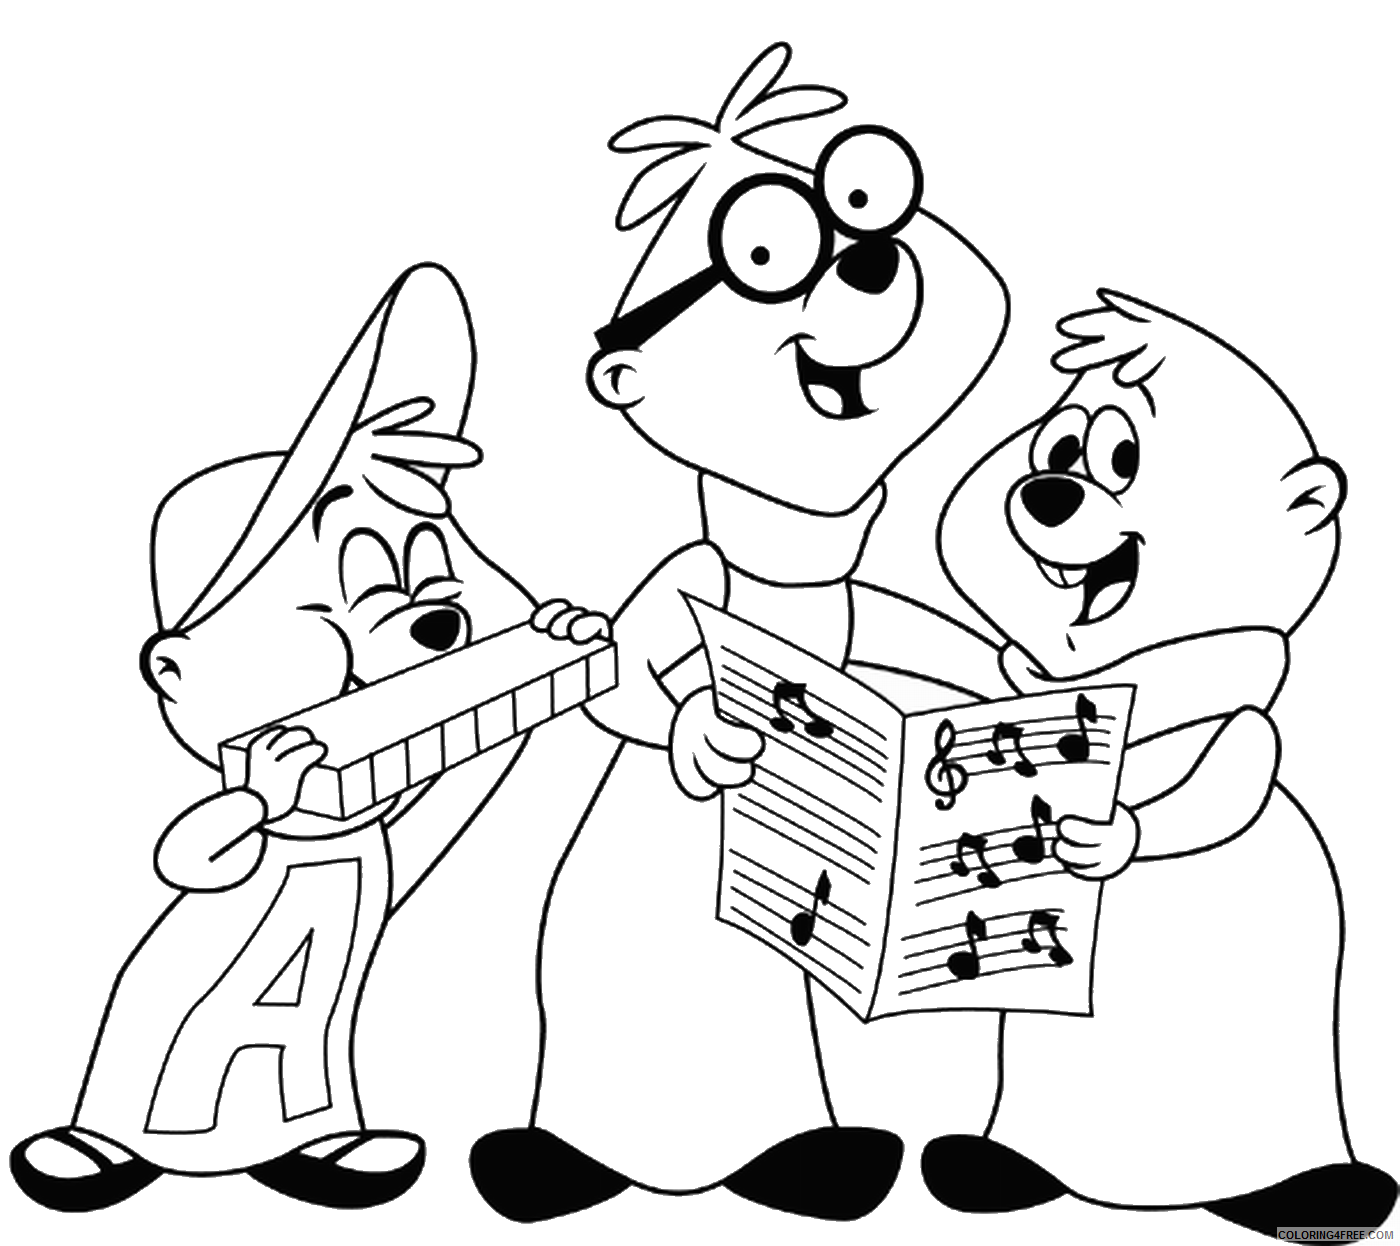 Alvin and the Chipmunks Coloring Pages TV Film alvin_cl_21 Printable 2020 00060 Coloring4free